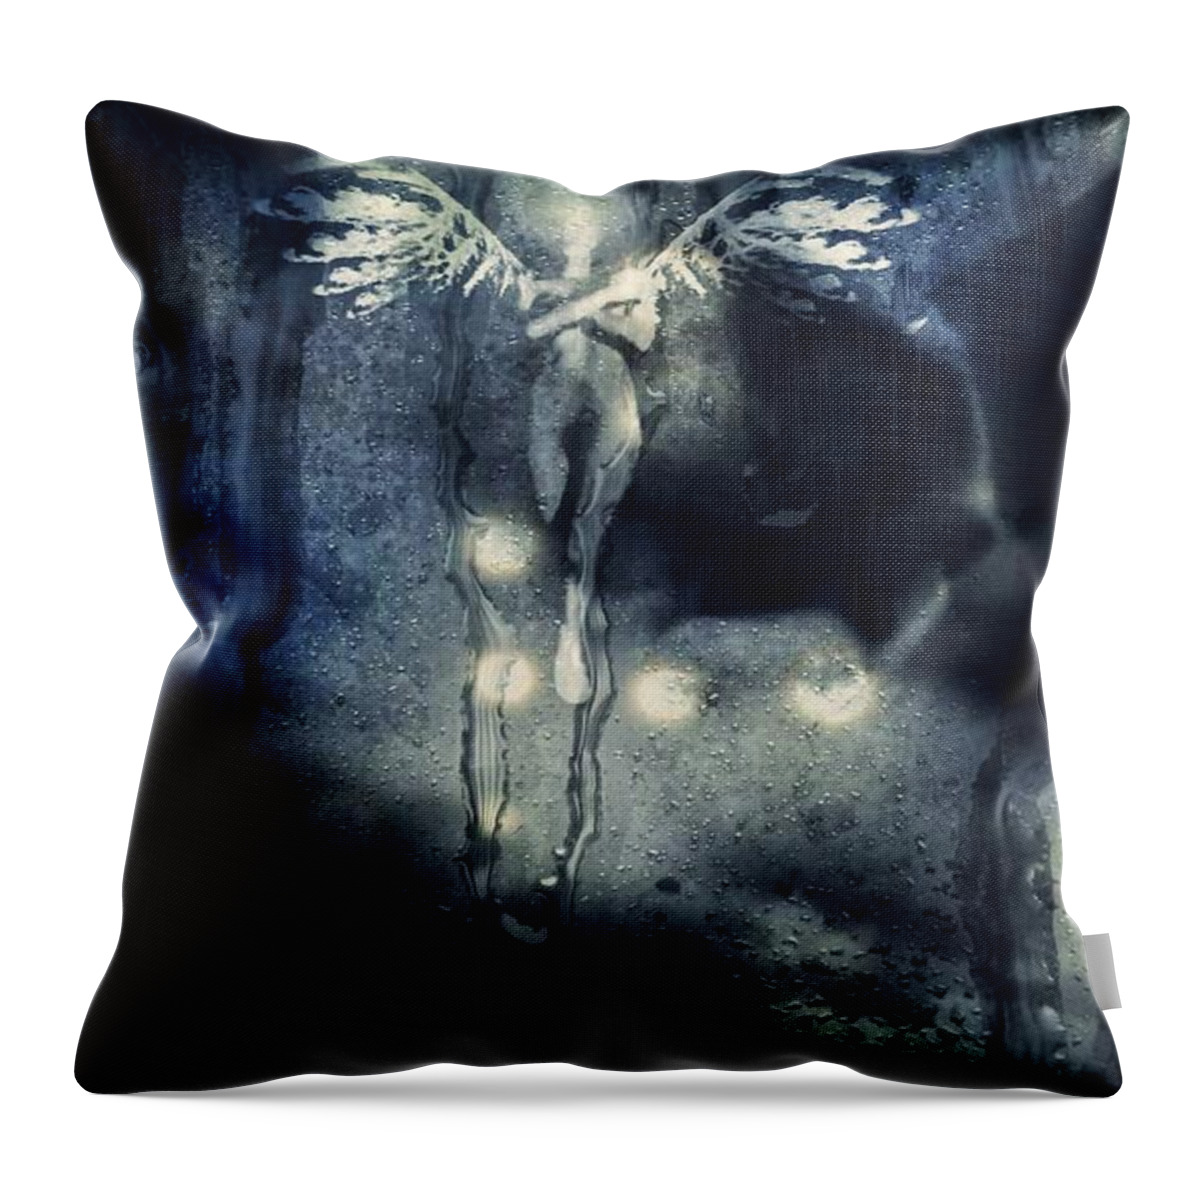  Throw Pillow featuring the photograph Fate by Jessica S